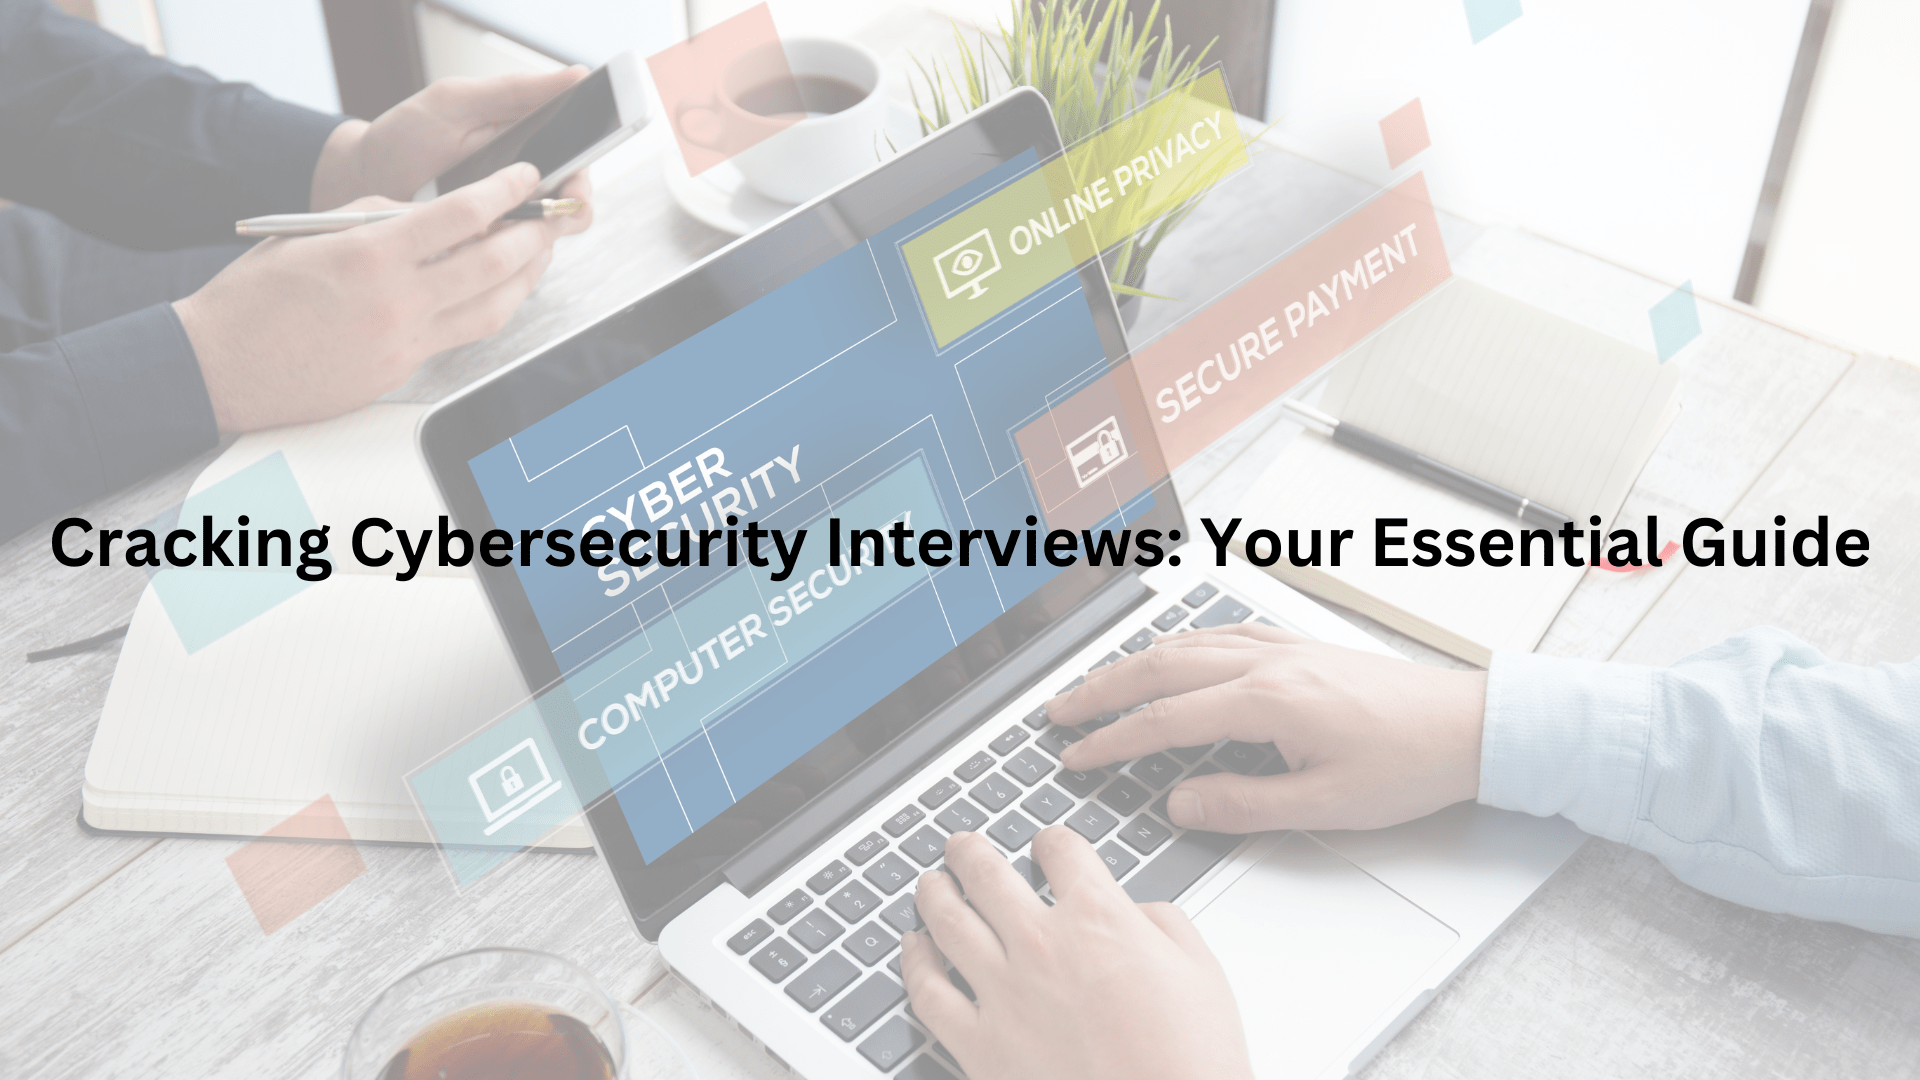 "Cracking Cybersecurity Interviews: Your Essential Guide